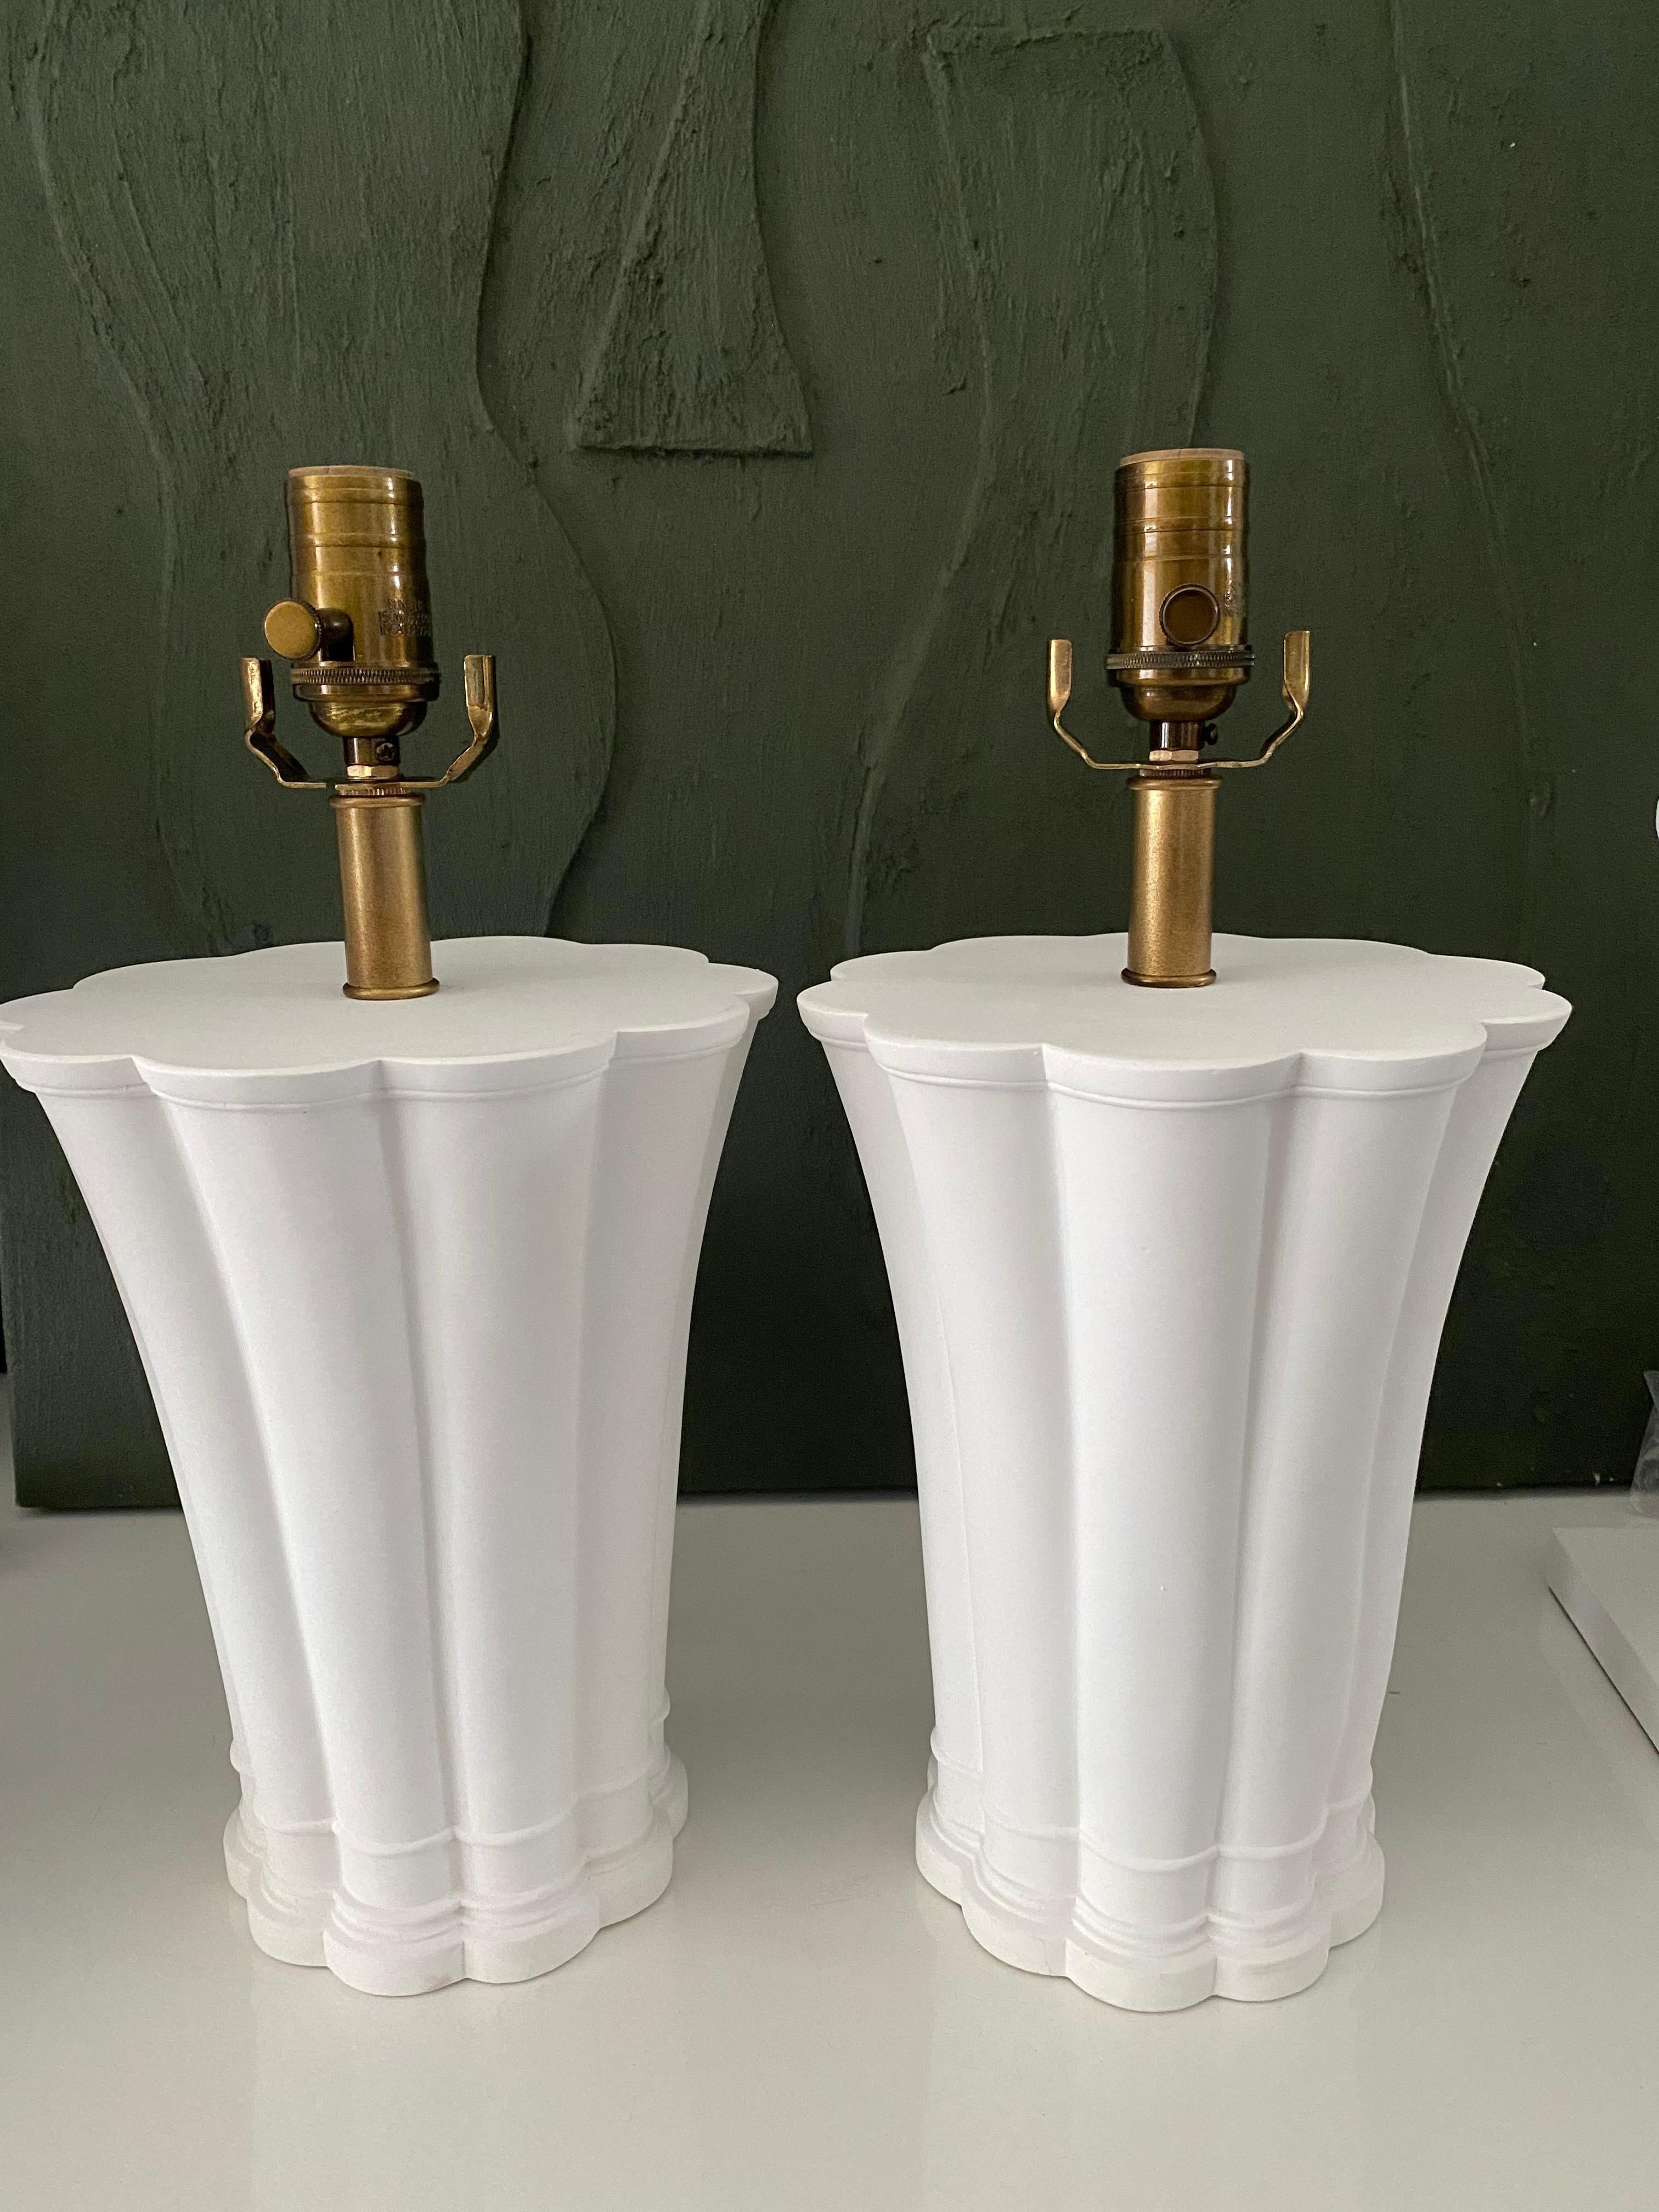 Hand made with care in Houston, Texas. This pair of plaster lamps features a lovely scallop silhouette, as well as antique brass socket and linen-wrapped cord.